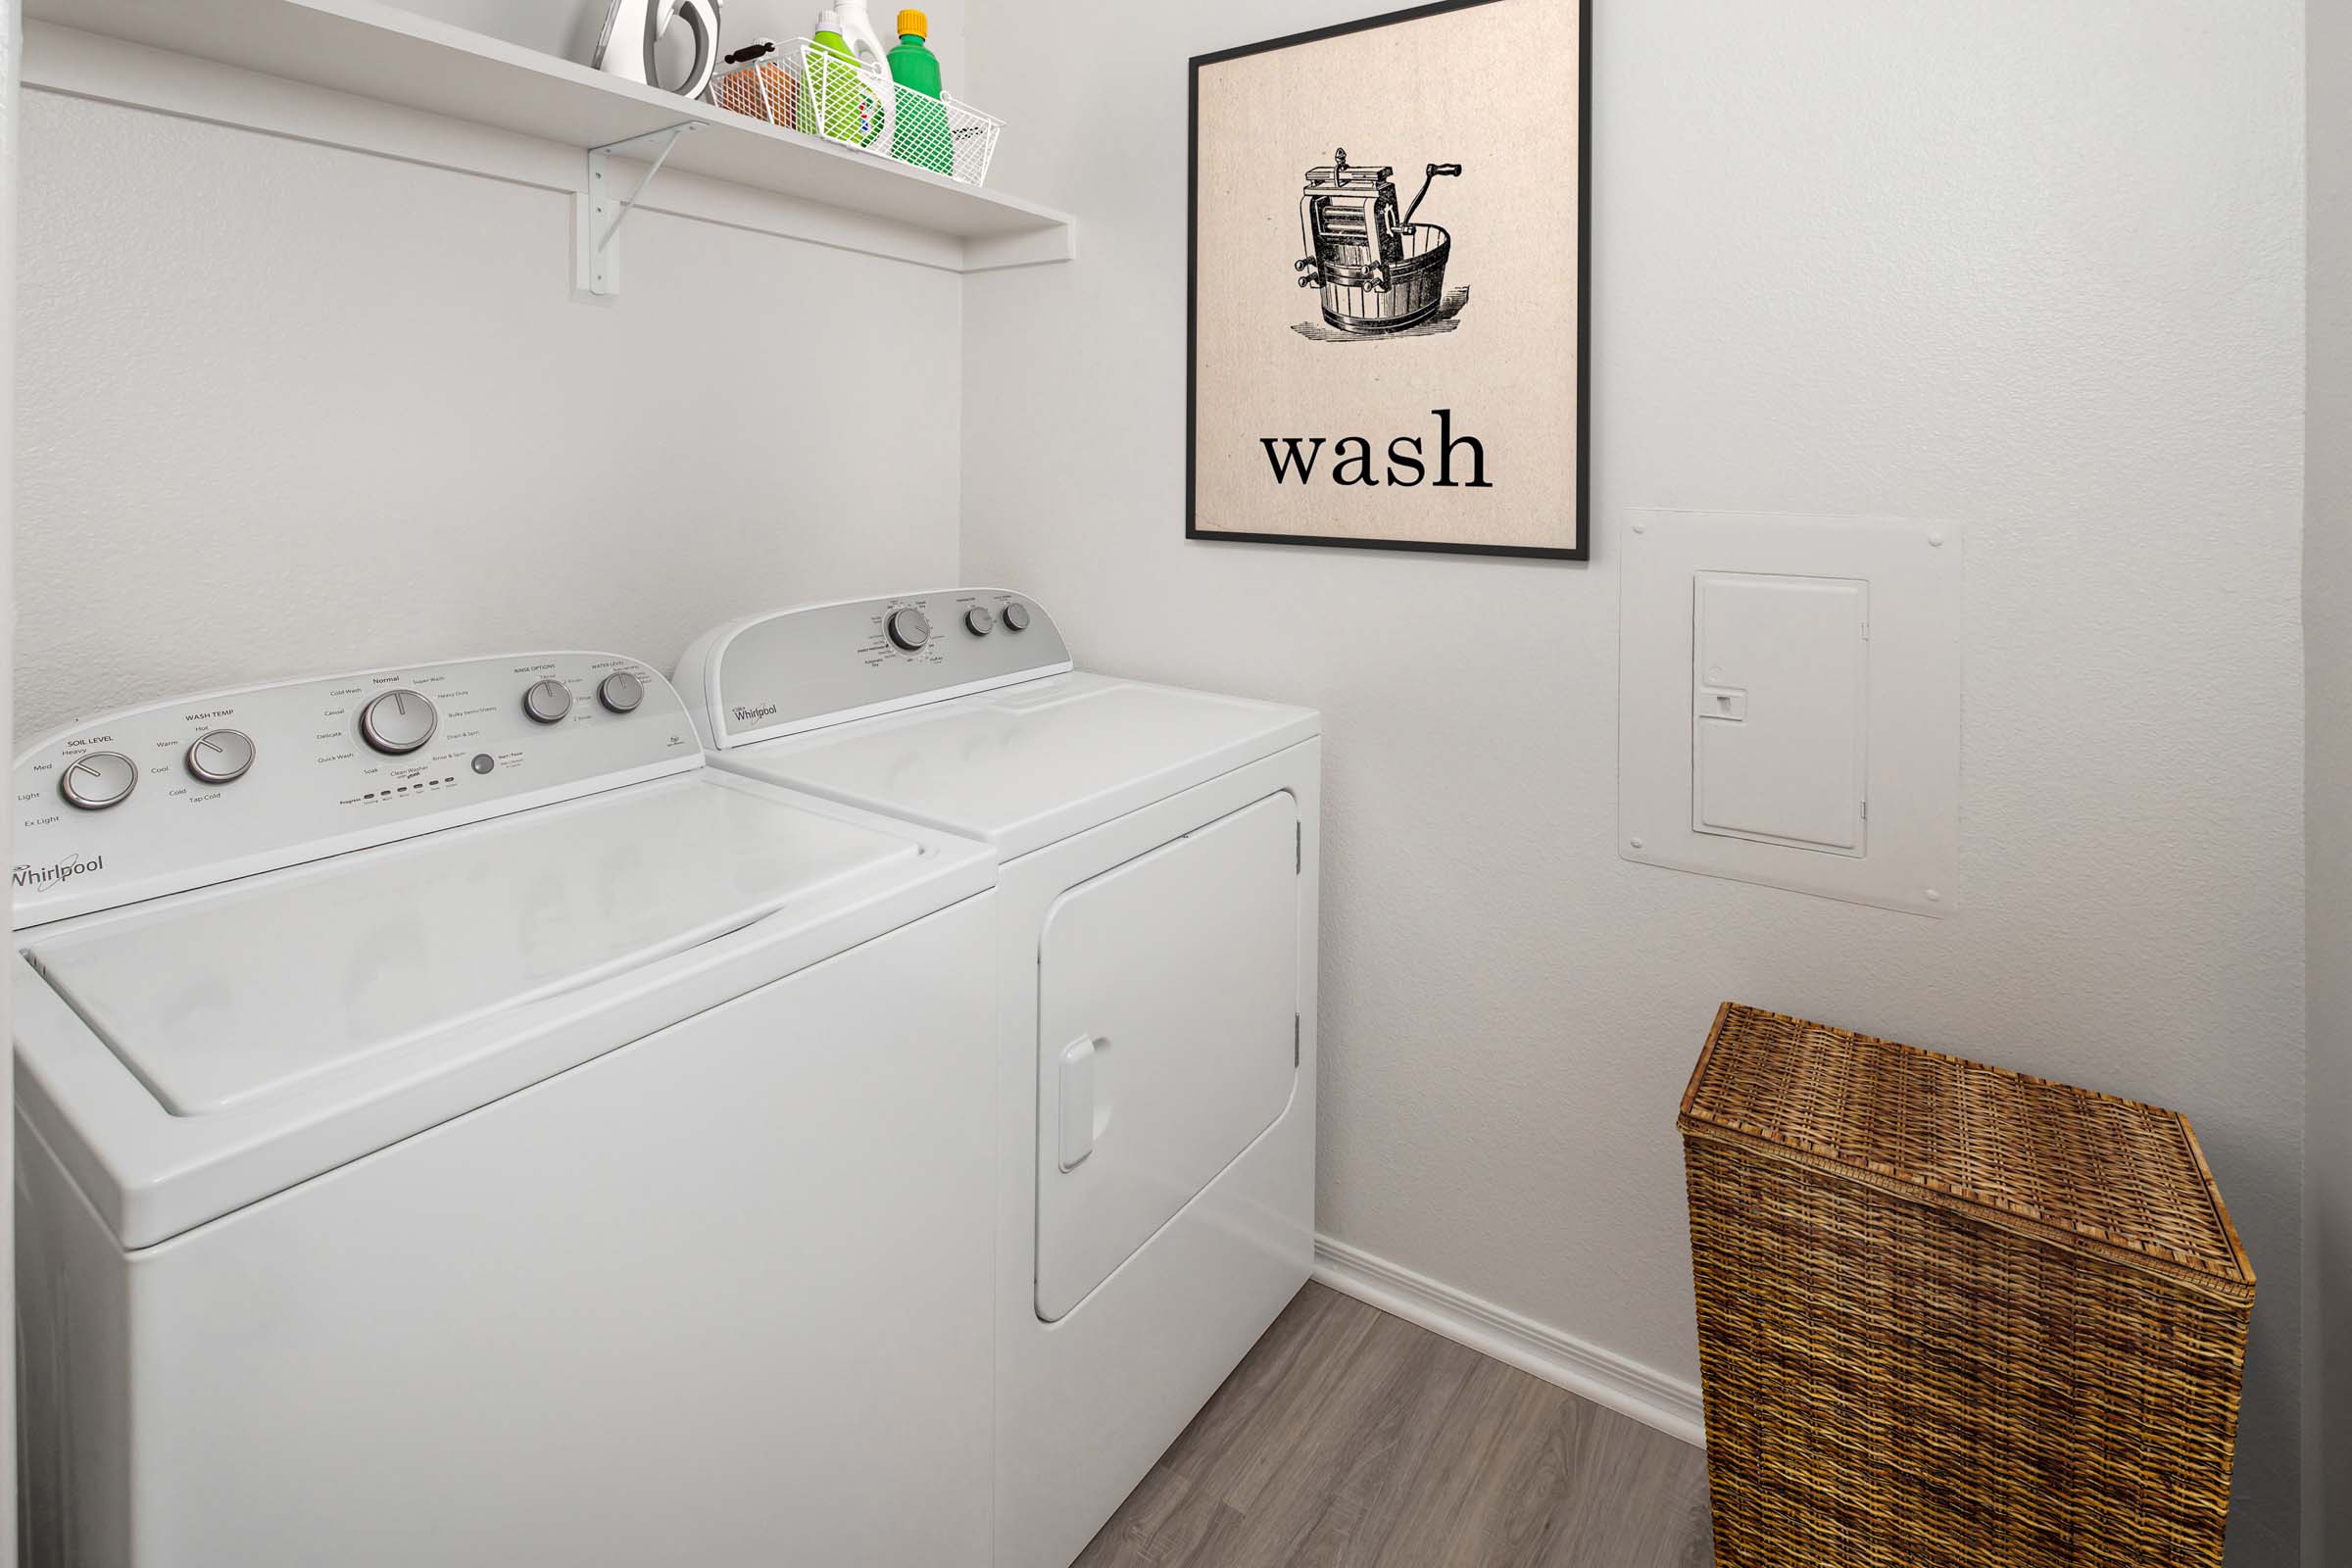 Laundry room with full size washer and dryer and wooden shelf for storage